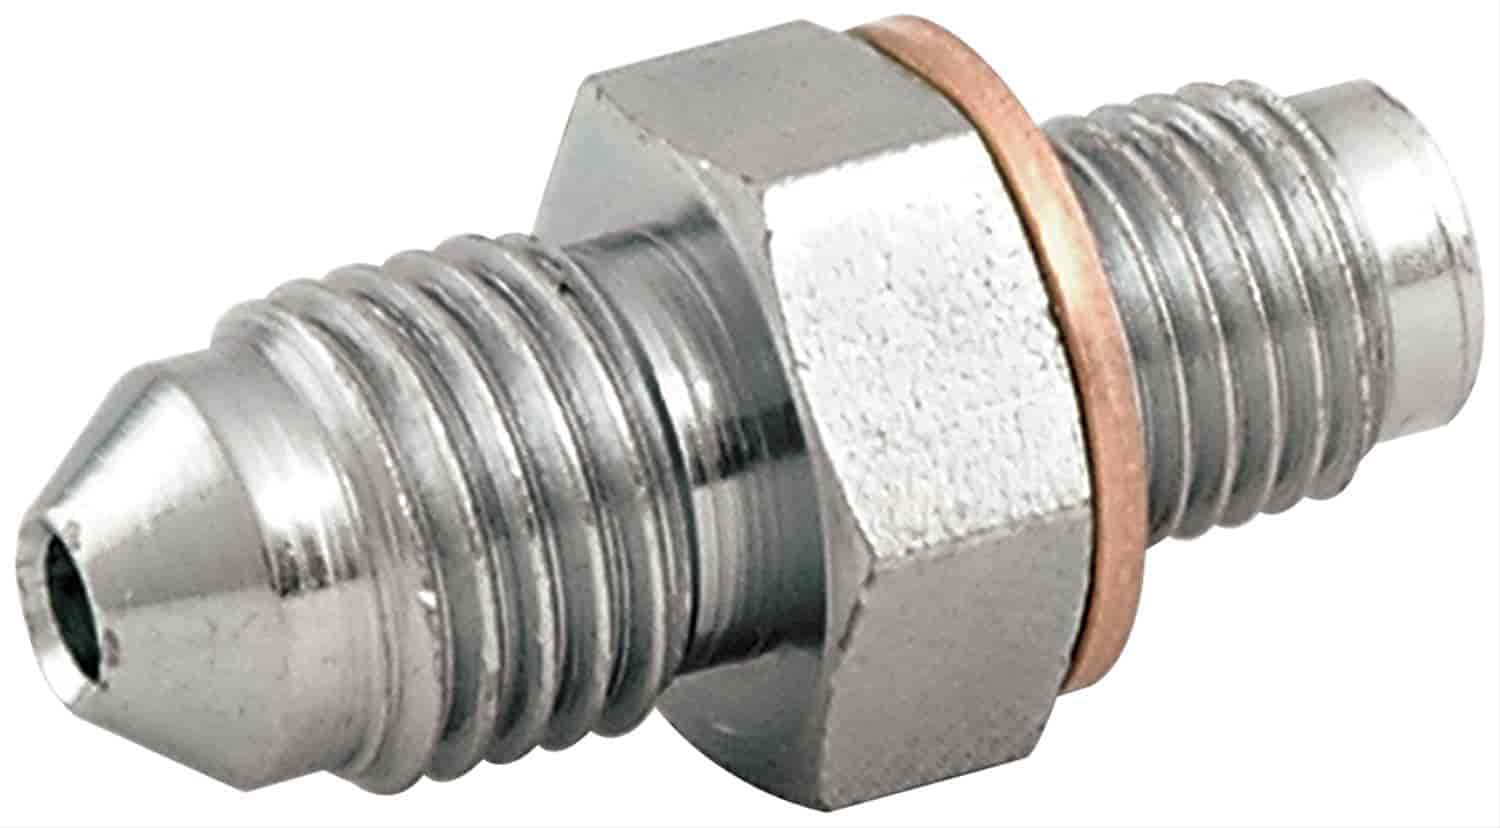 Adapter Fittings -4AN Male to 3/8"-24 Male with washer